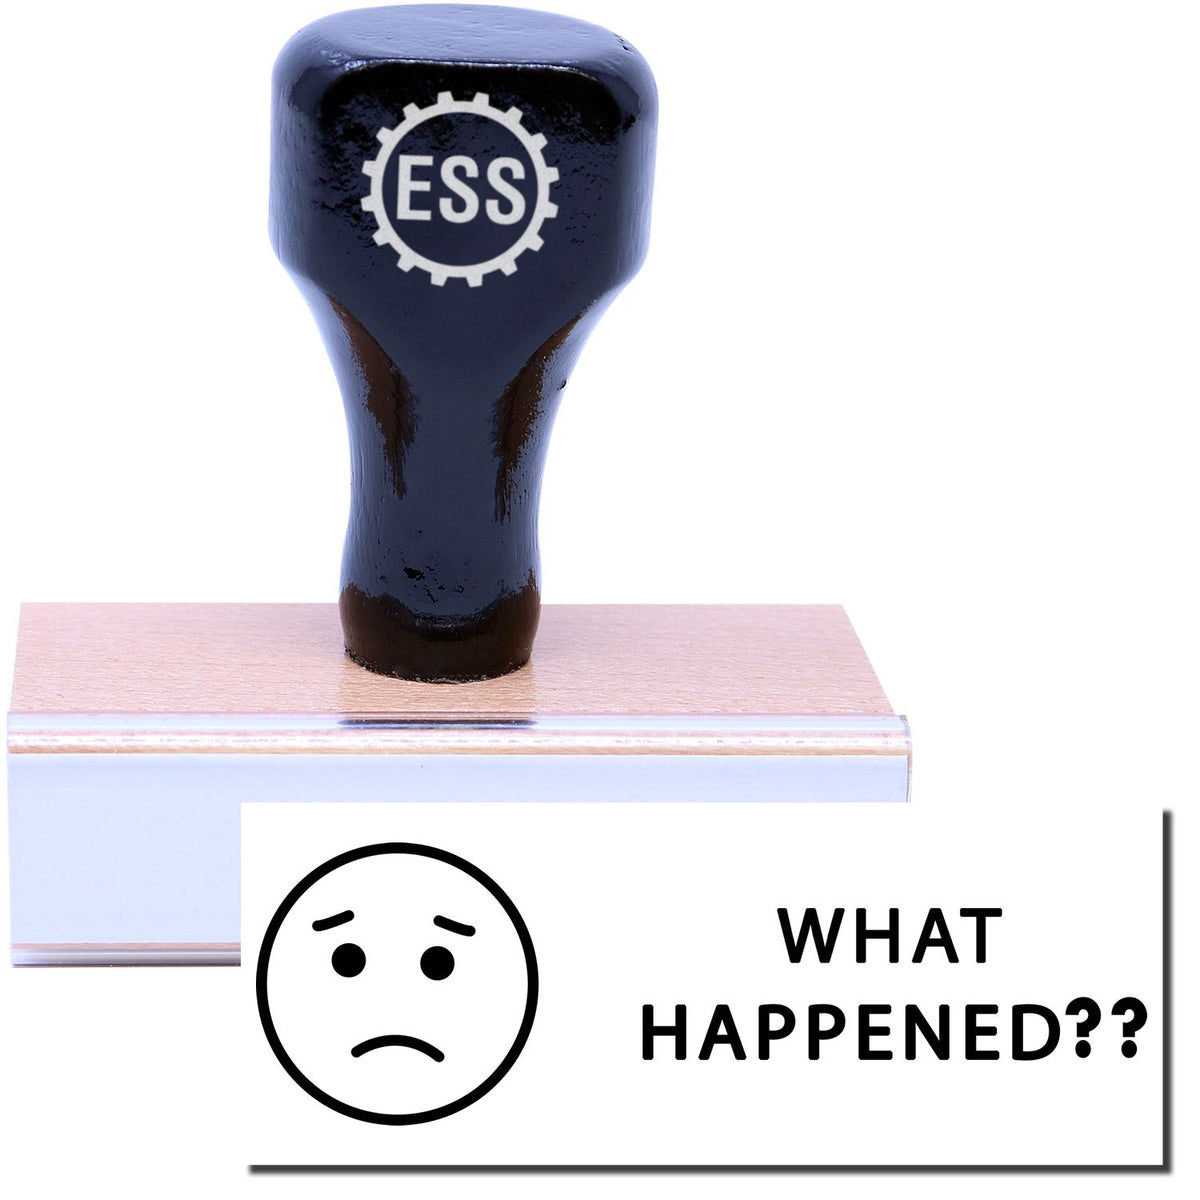 A stock office rubber stamp with a stamped image showing how the text &quot;WHAT HAPPENED??&quot; in a large bold font with an image of a sad face emoji on the left side is displayed after stamping.